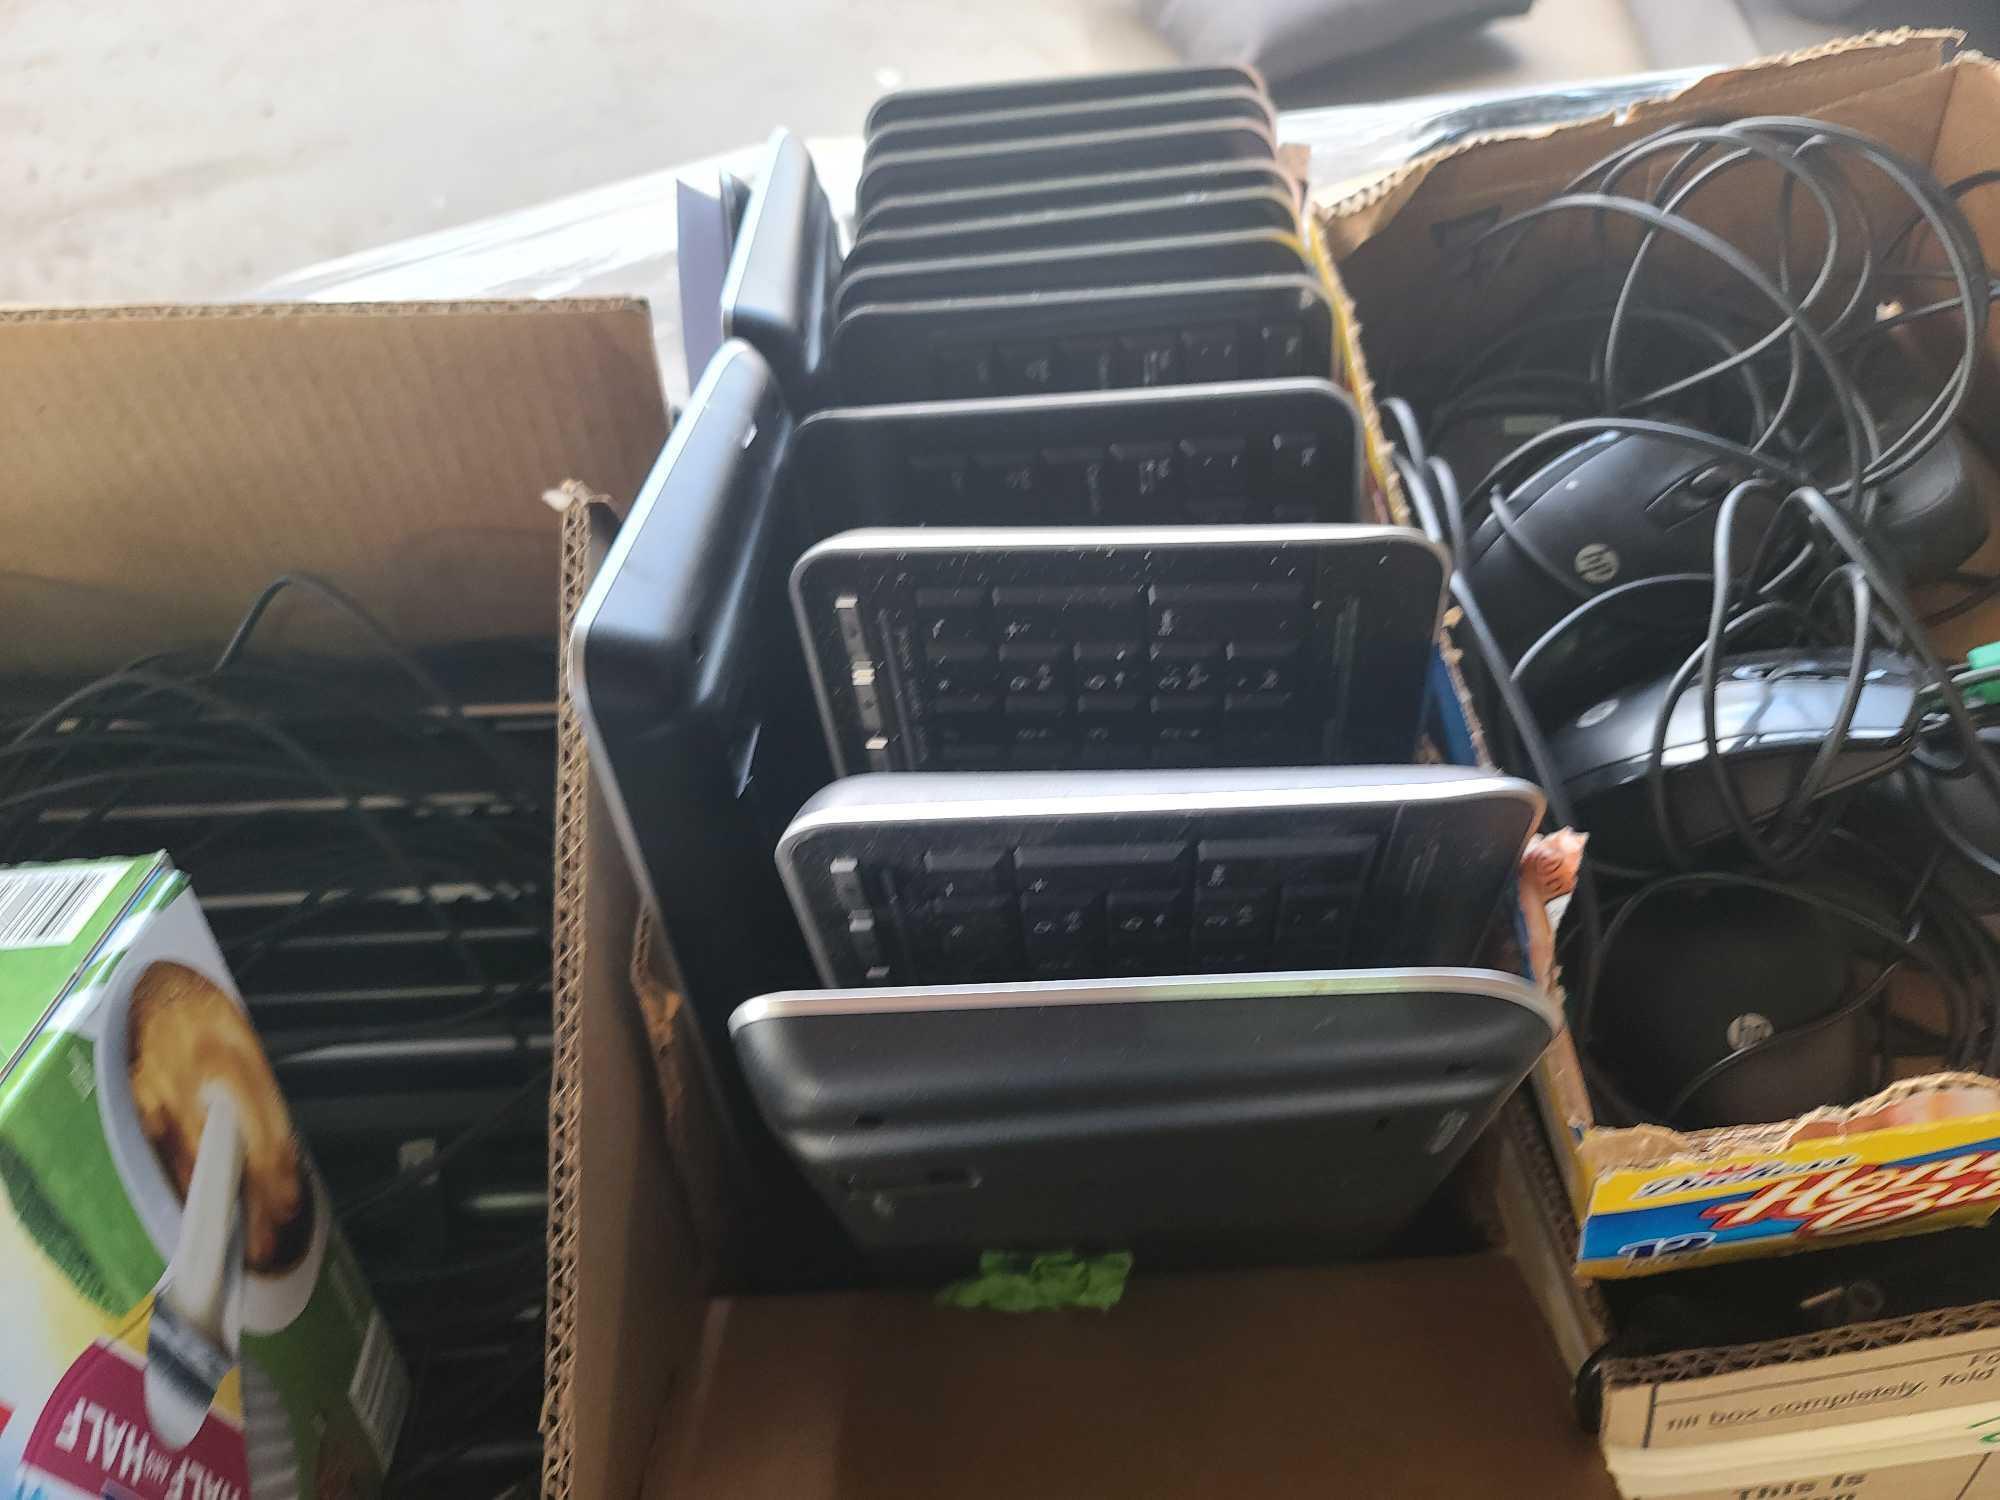 Group of Keyboards, Group of Hp Computer Mice, Assorted Printers, Group of Misc. Wires/Chargers